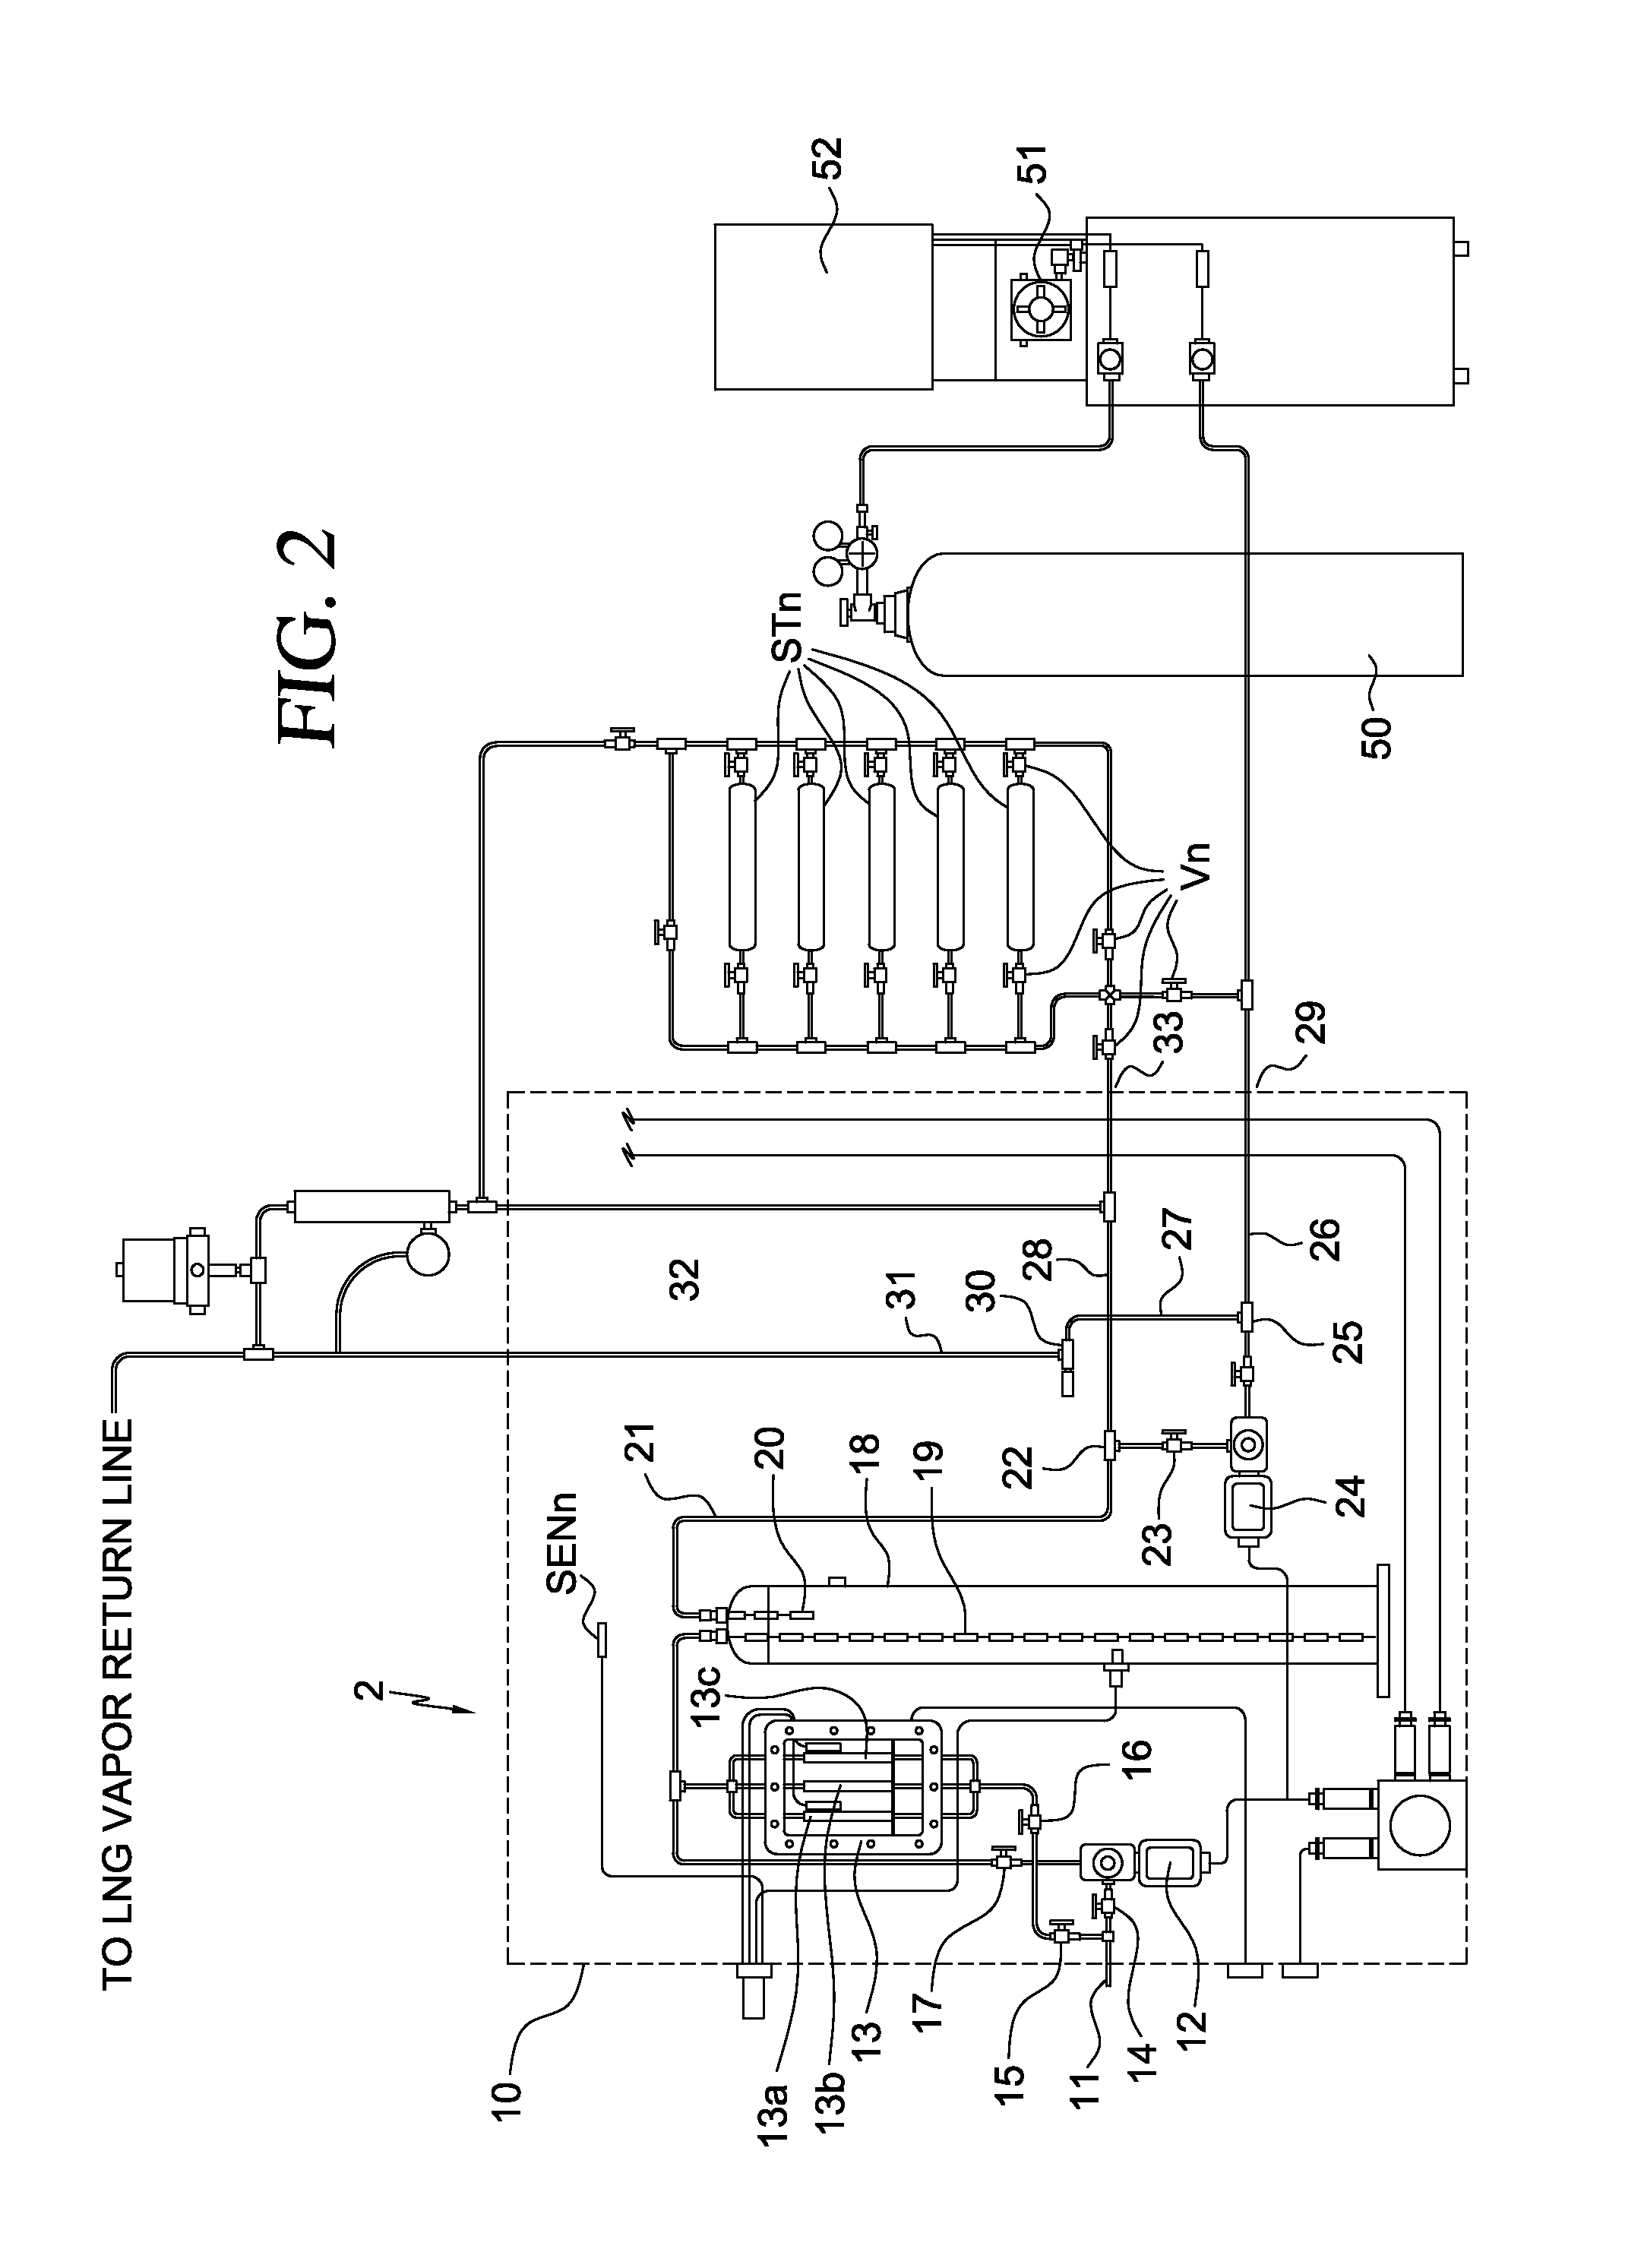 Liquid Gas Vaporization and Measurement System and Method